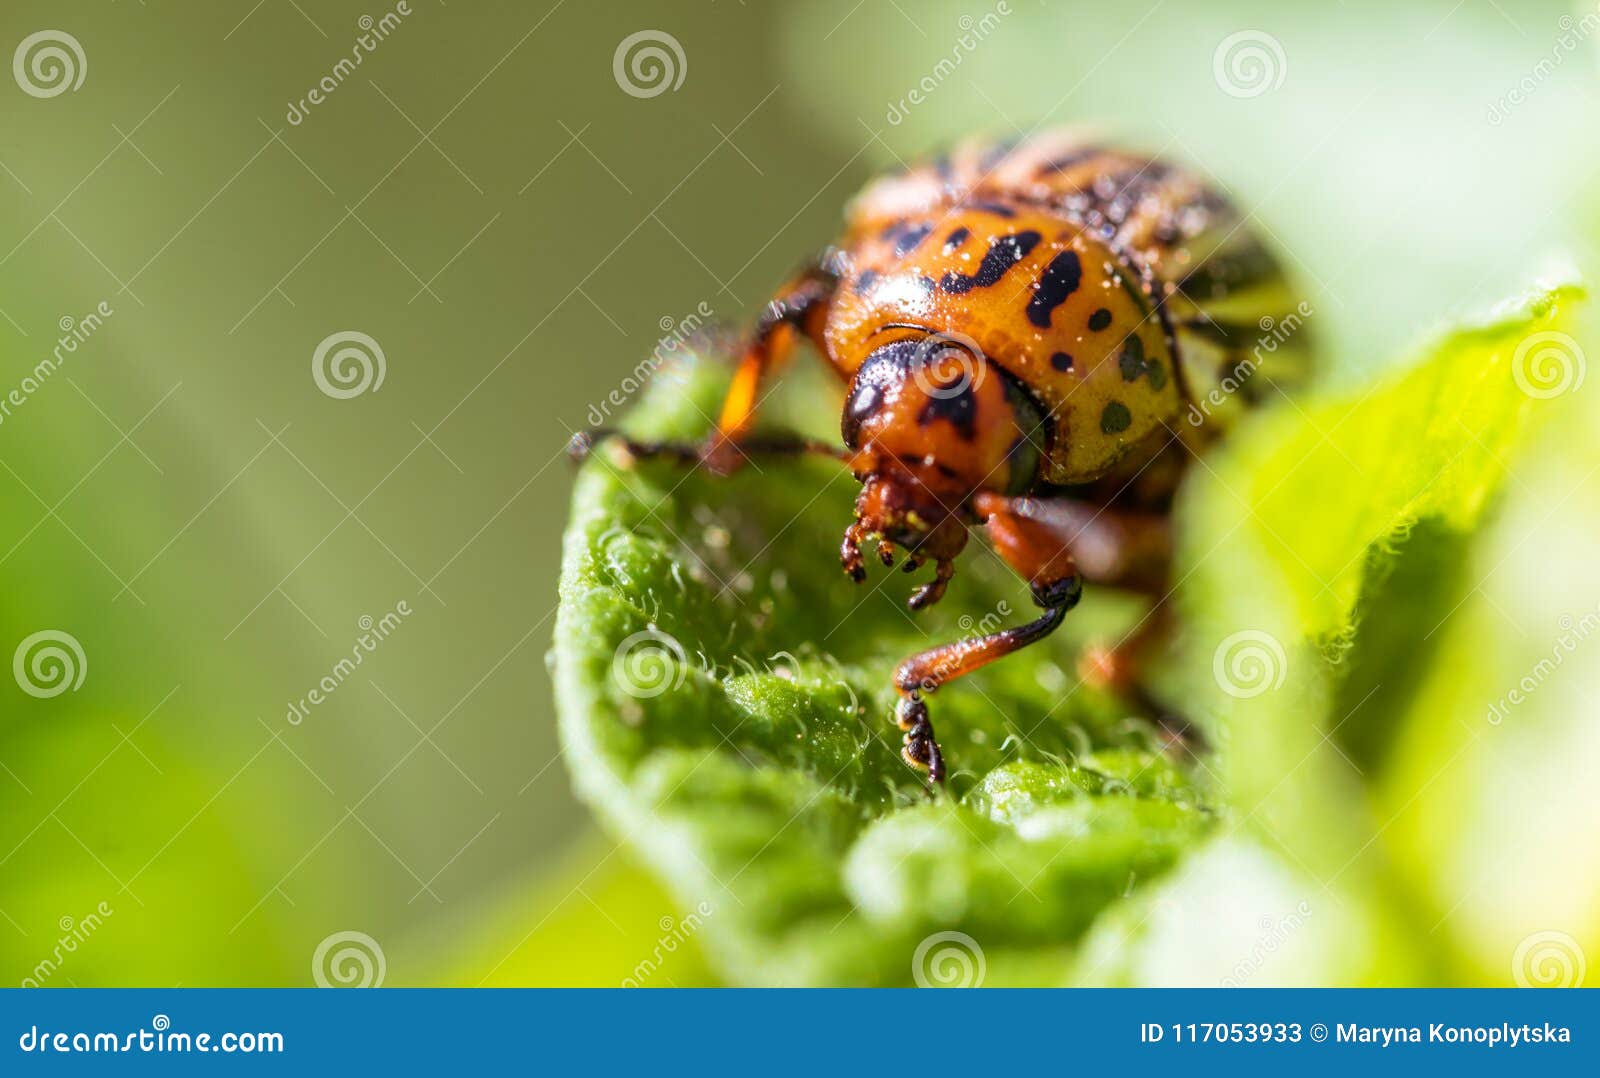 Colorado Beetle Eats Leaves Of Potatoes Fighting Pests In The